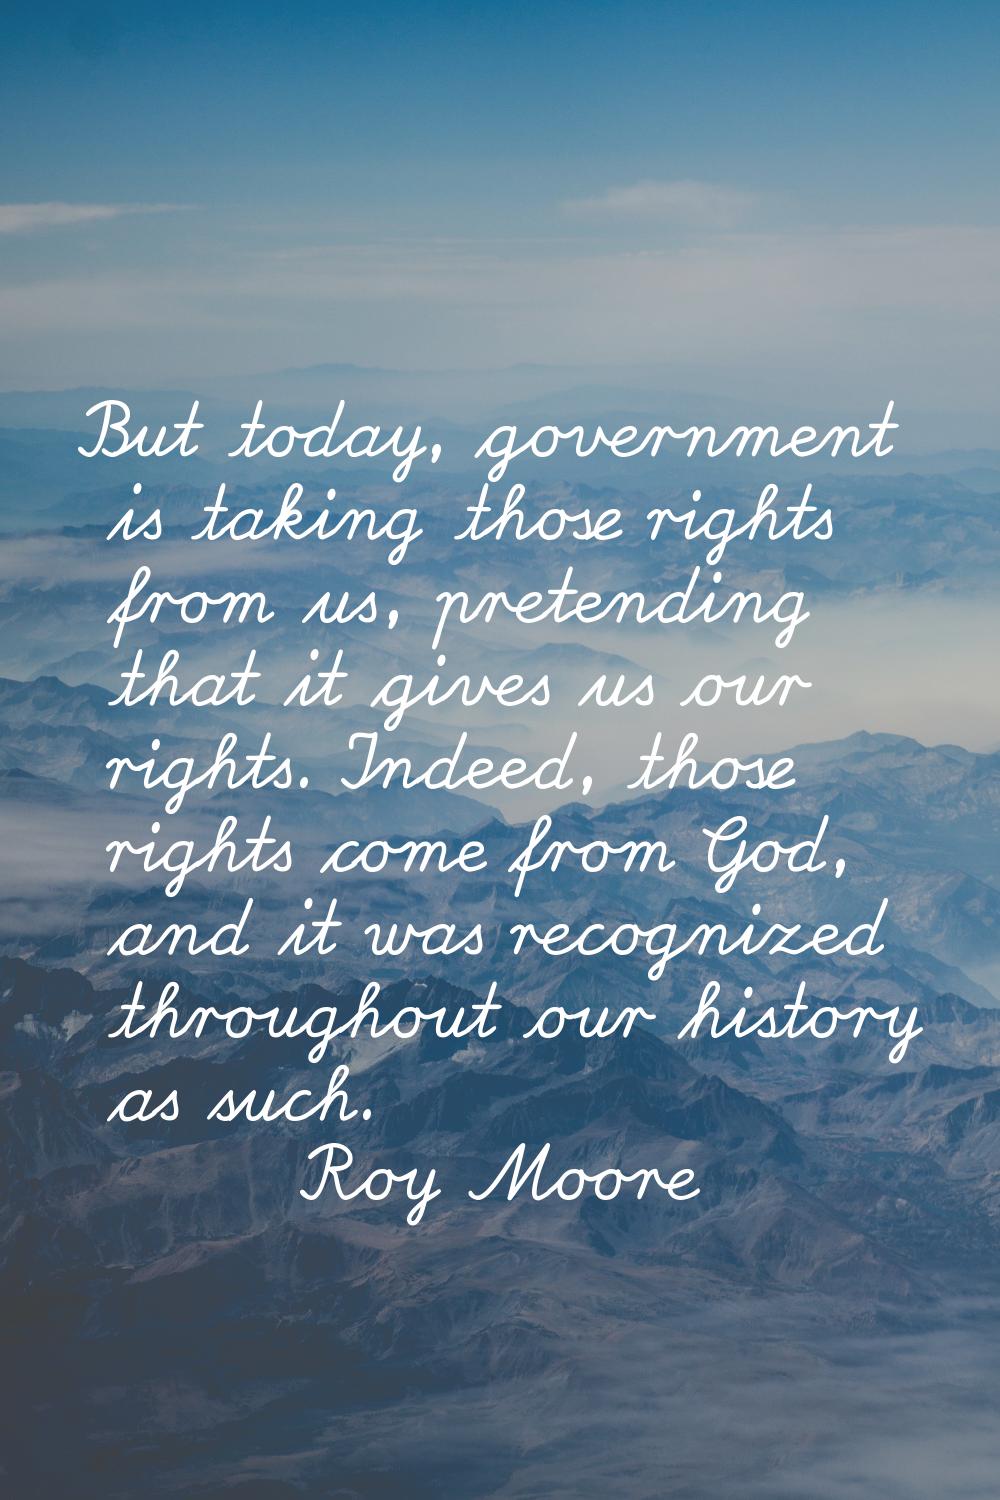 But today, government is taking those rights from us, pretending that it gives us our rights. Indee